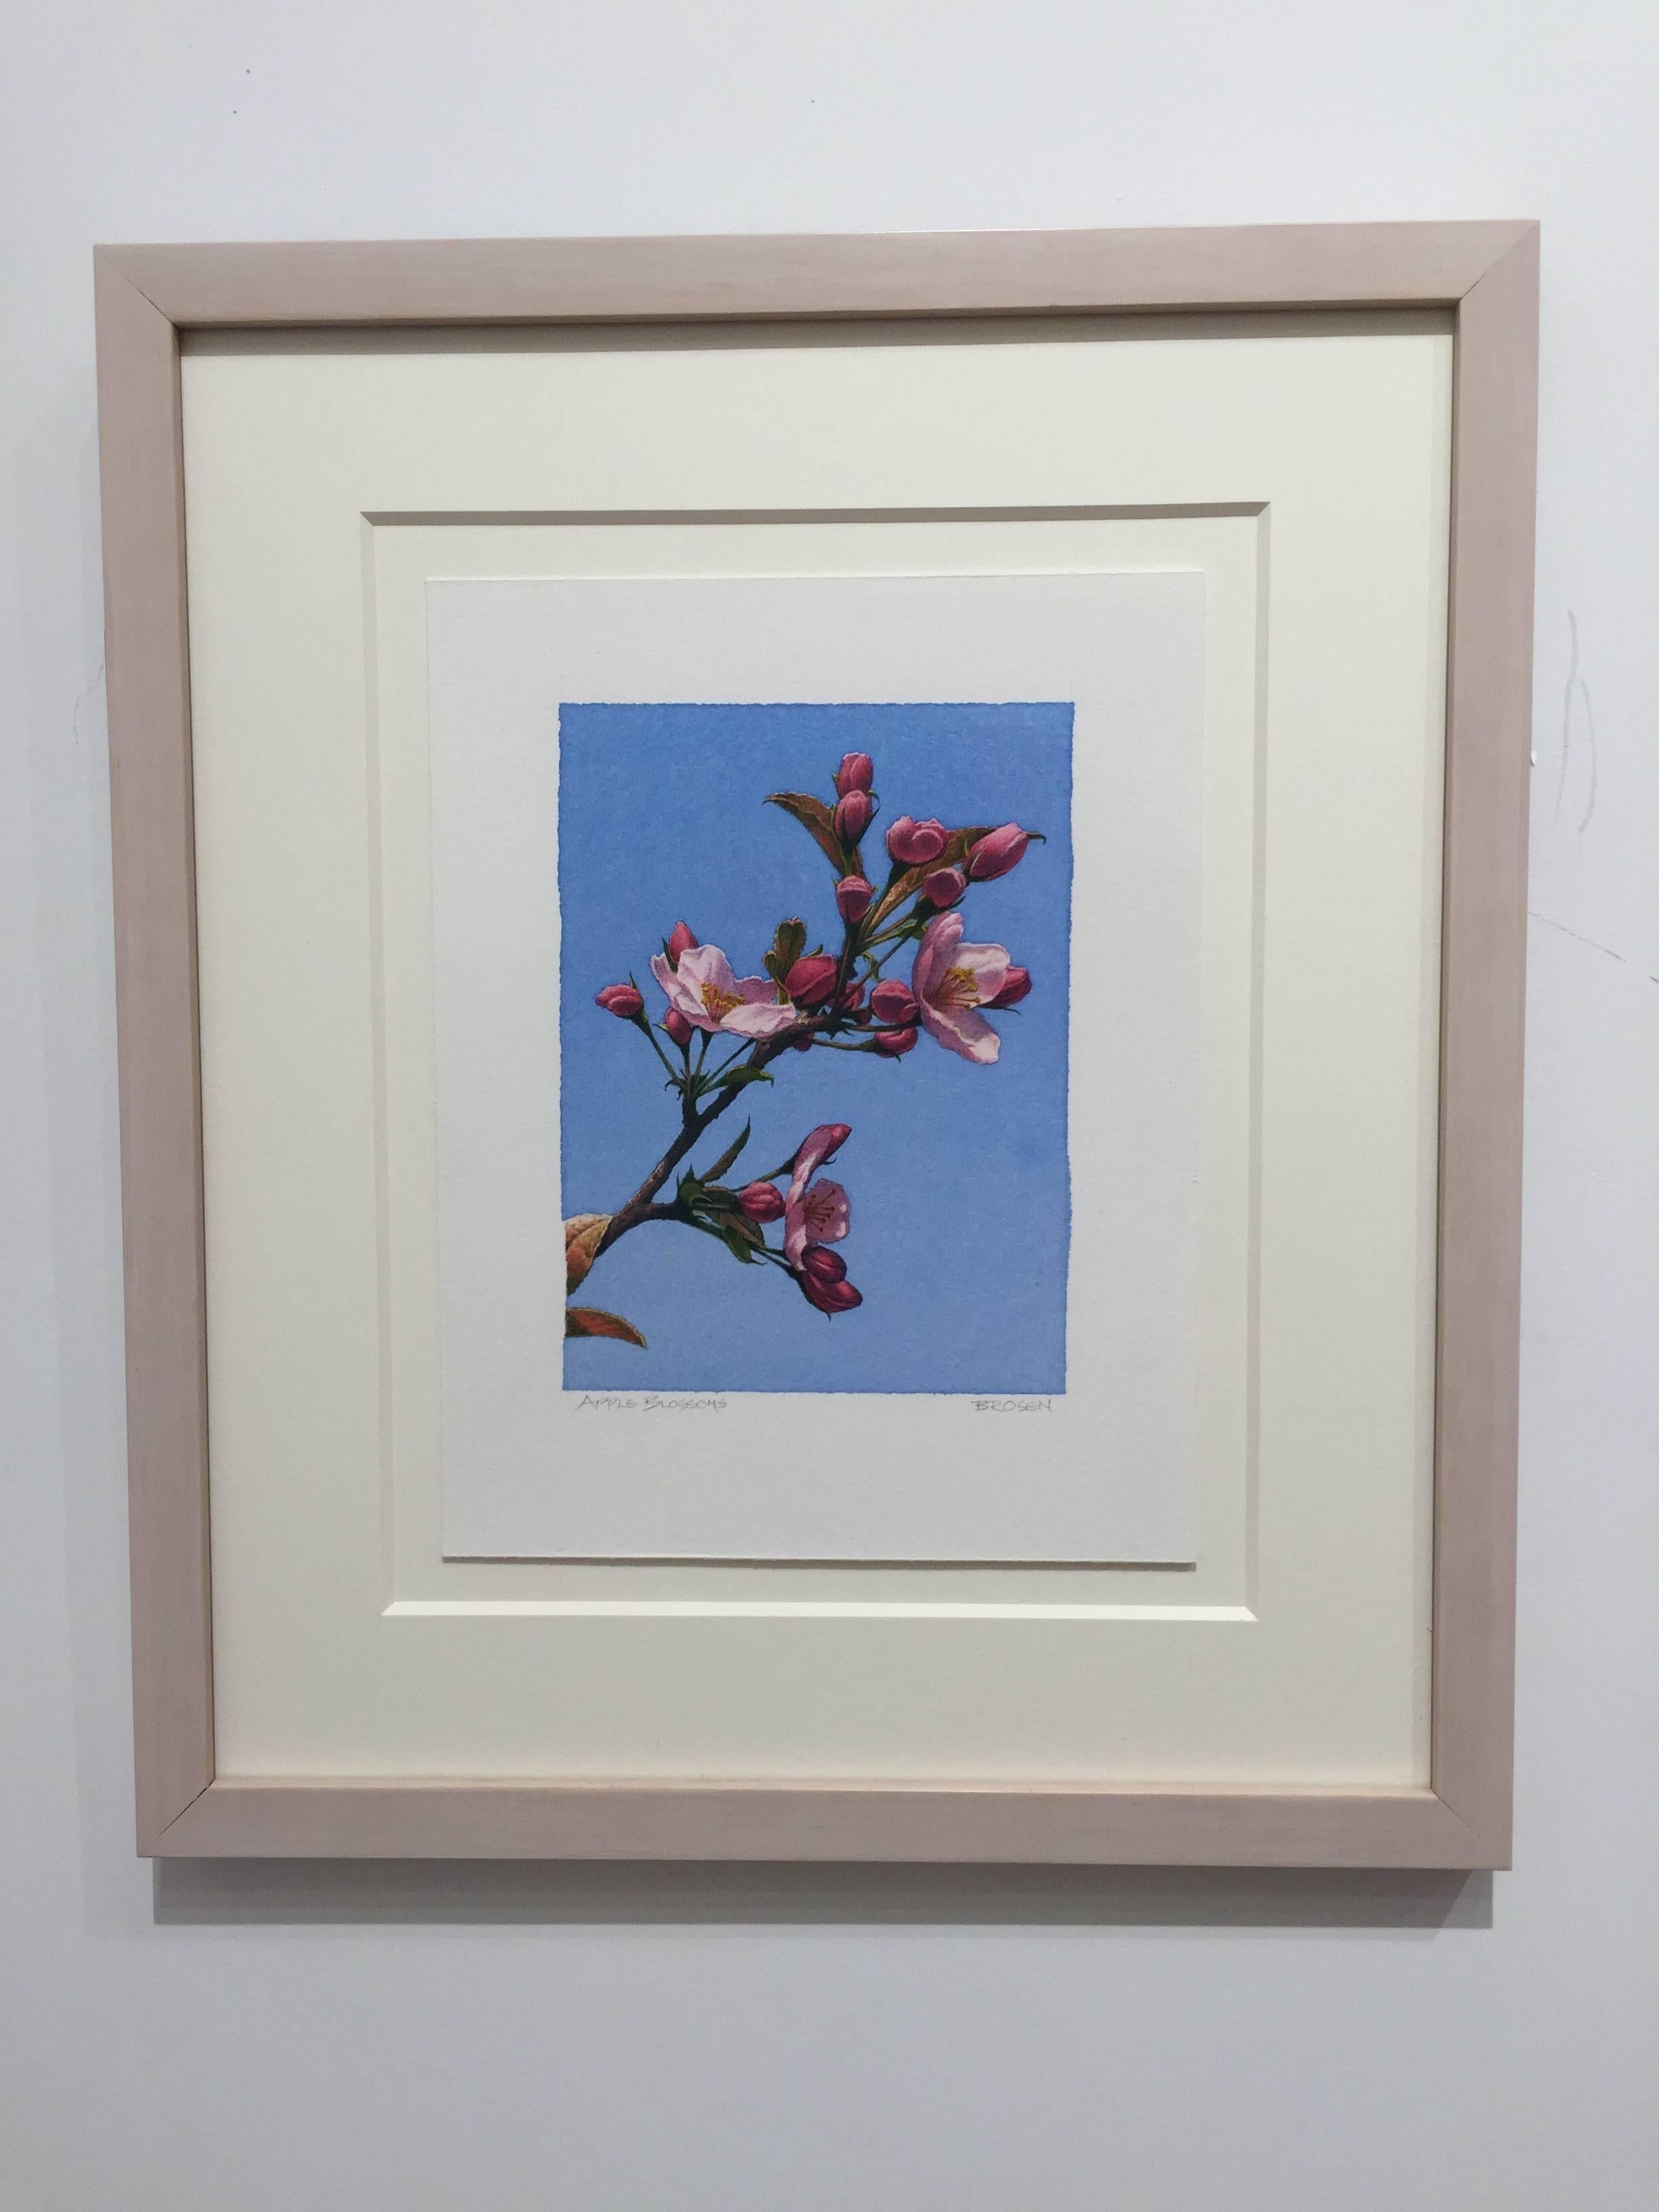 Frederick Brosen, Apple Blossoms, Realist graphite and watercolor painting, 2017 2